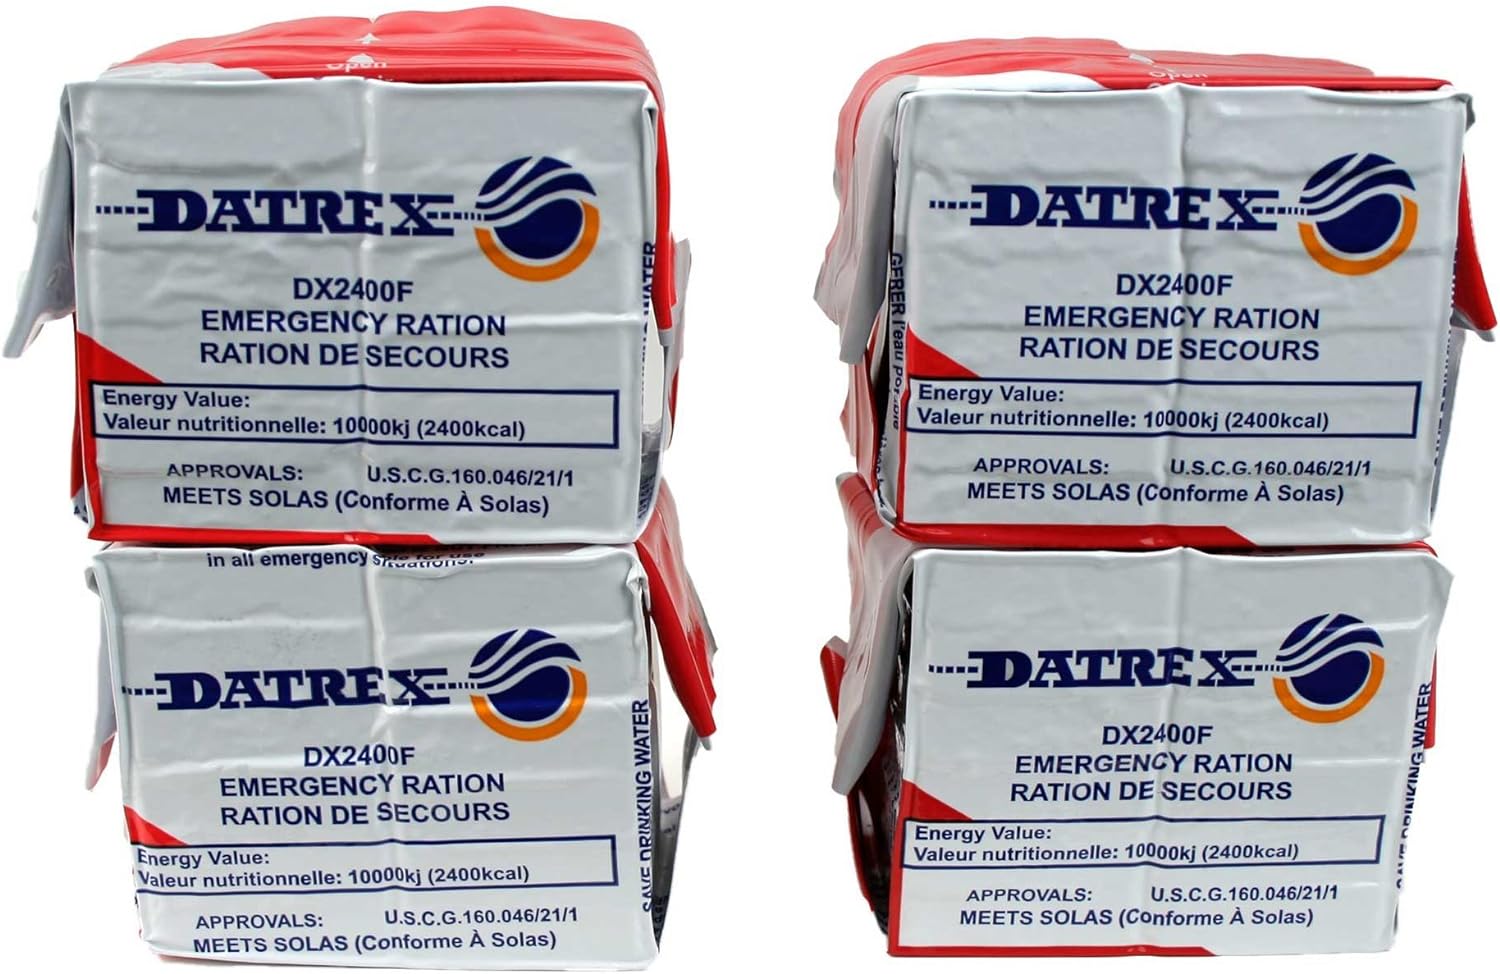 DATREX Emergency Food Ration Bars for Disaster or Survival, 2400 Calories per Pack of 12 Bars